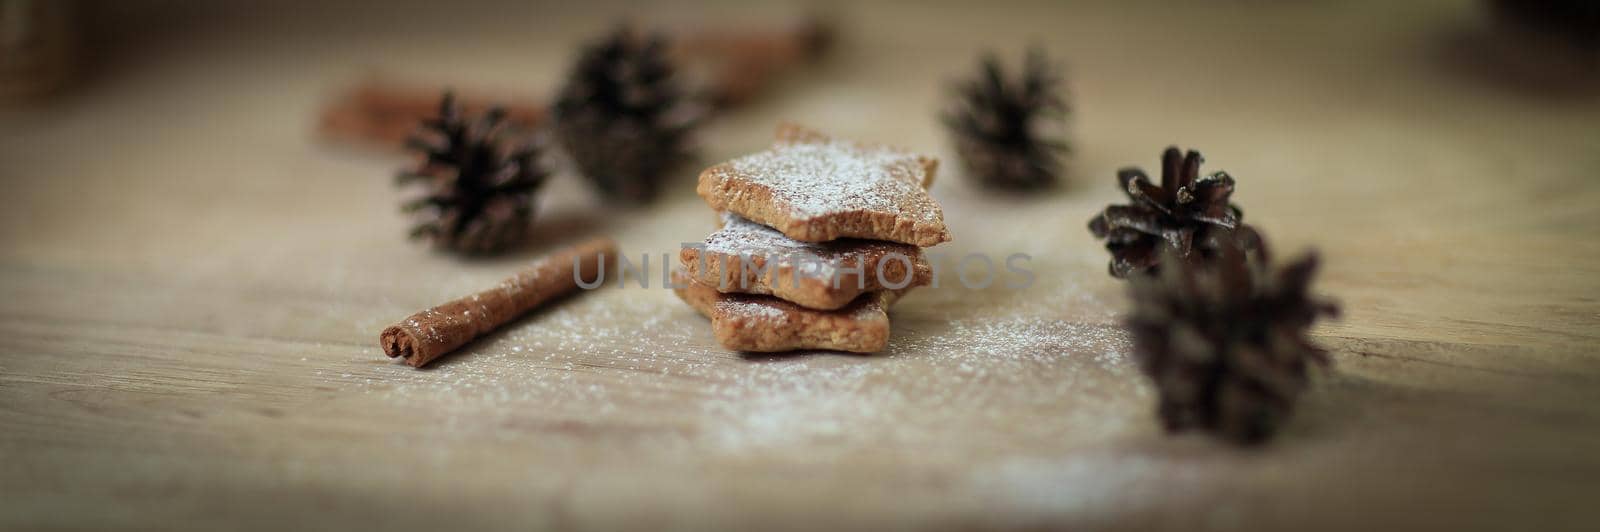 Christmas table. blurred image homemade cookies on wooden backg by SmartPhotoLab